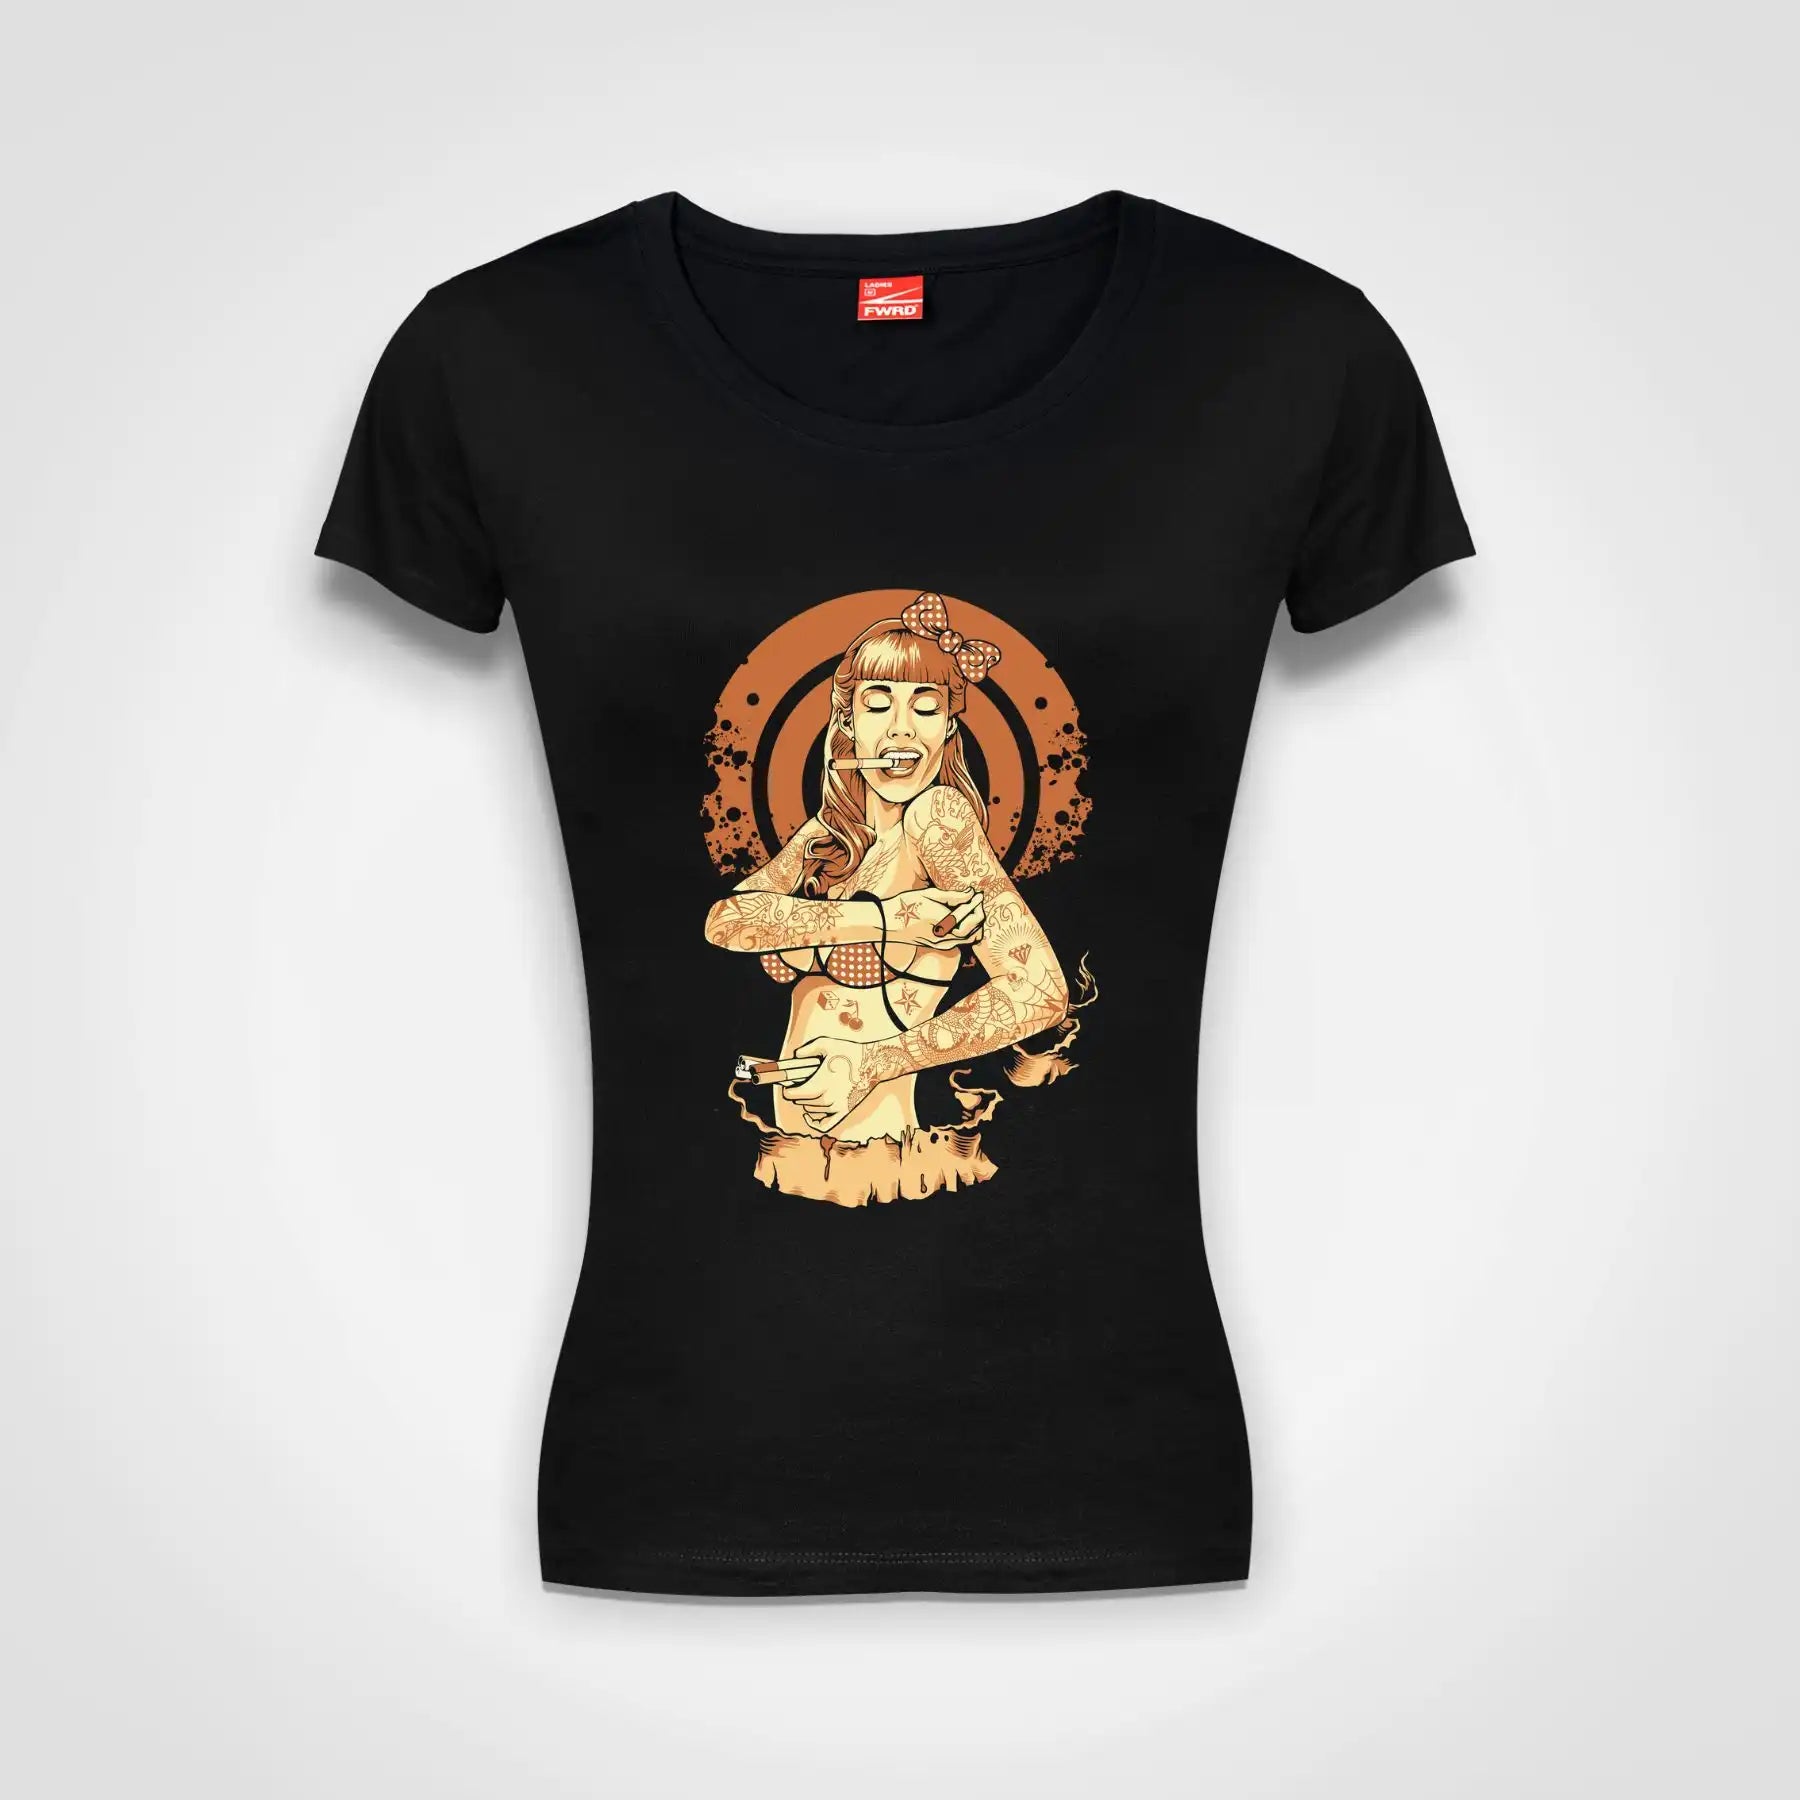 Sailor Girl Ladies Fitted T-Shirt Black IZZIT APPAREL